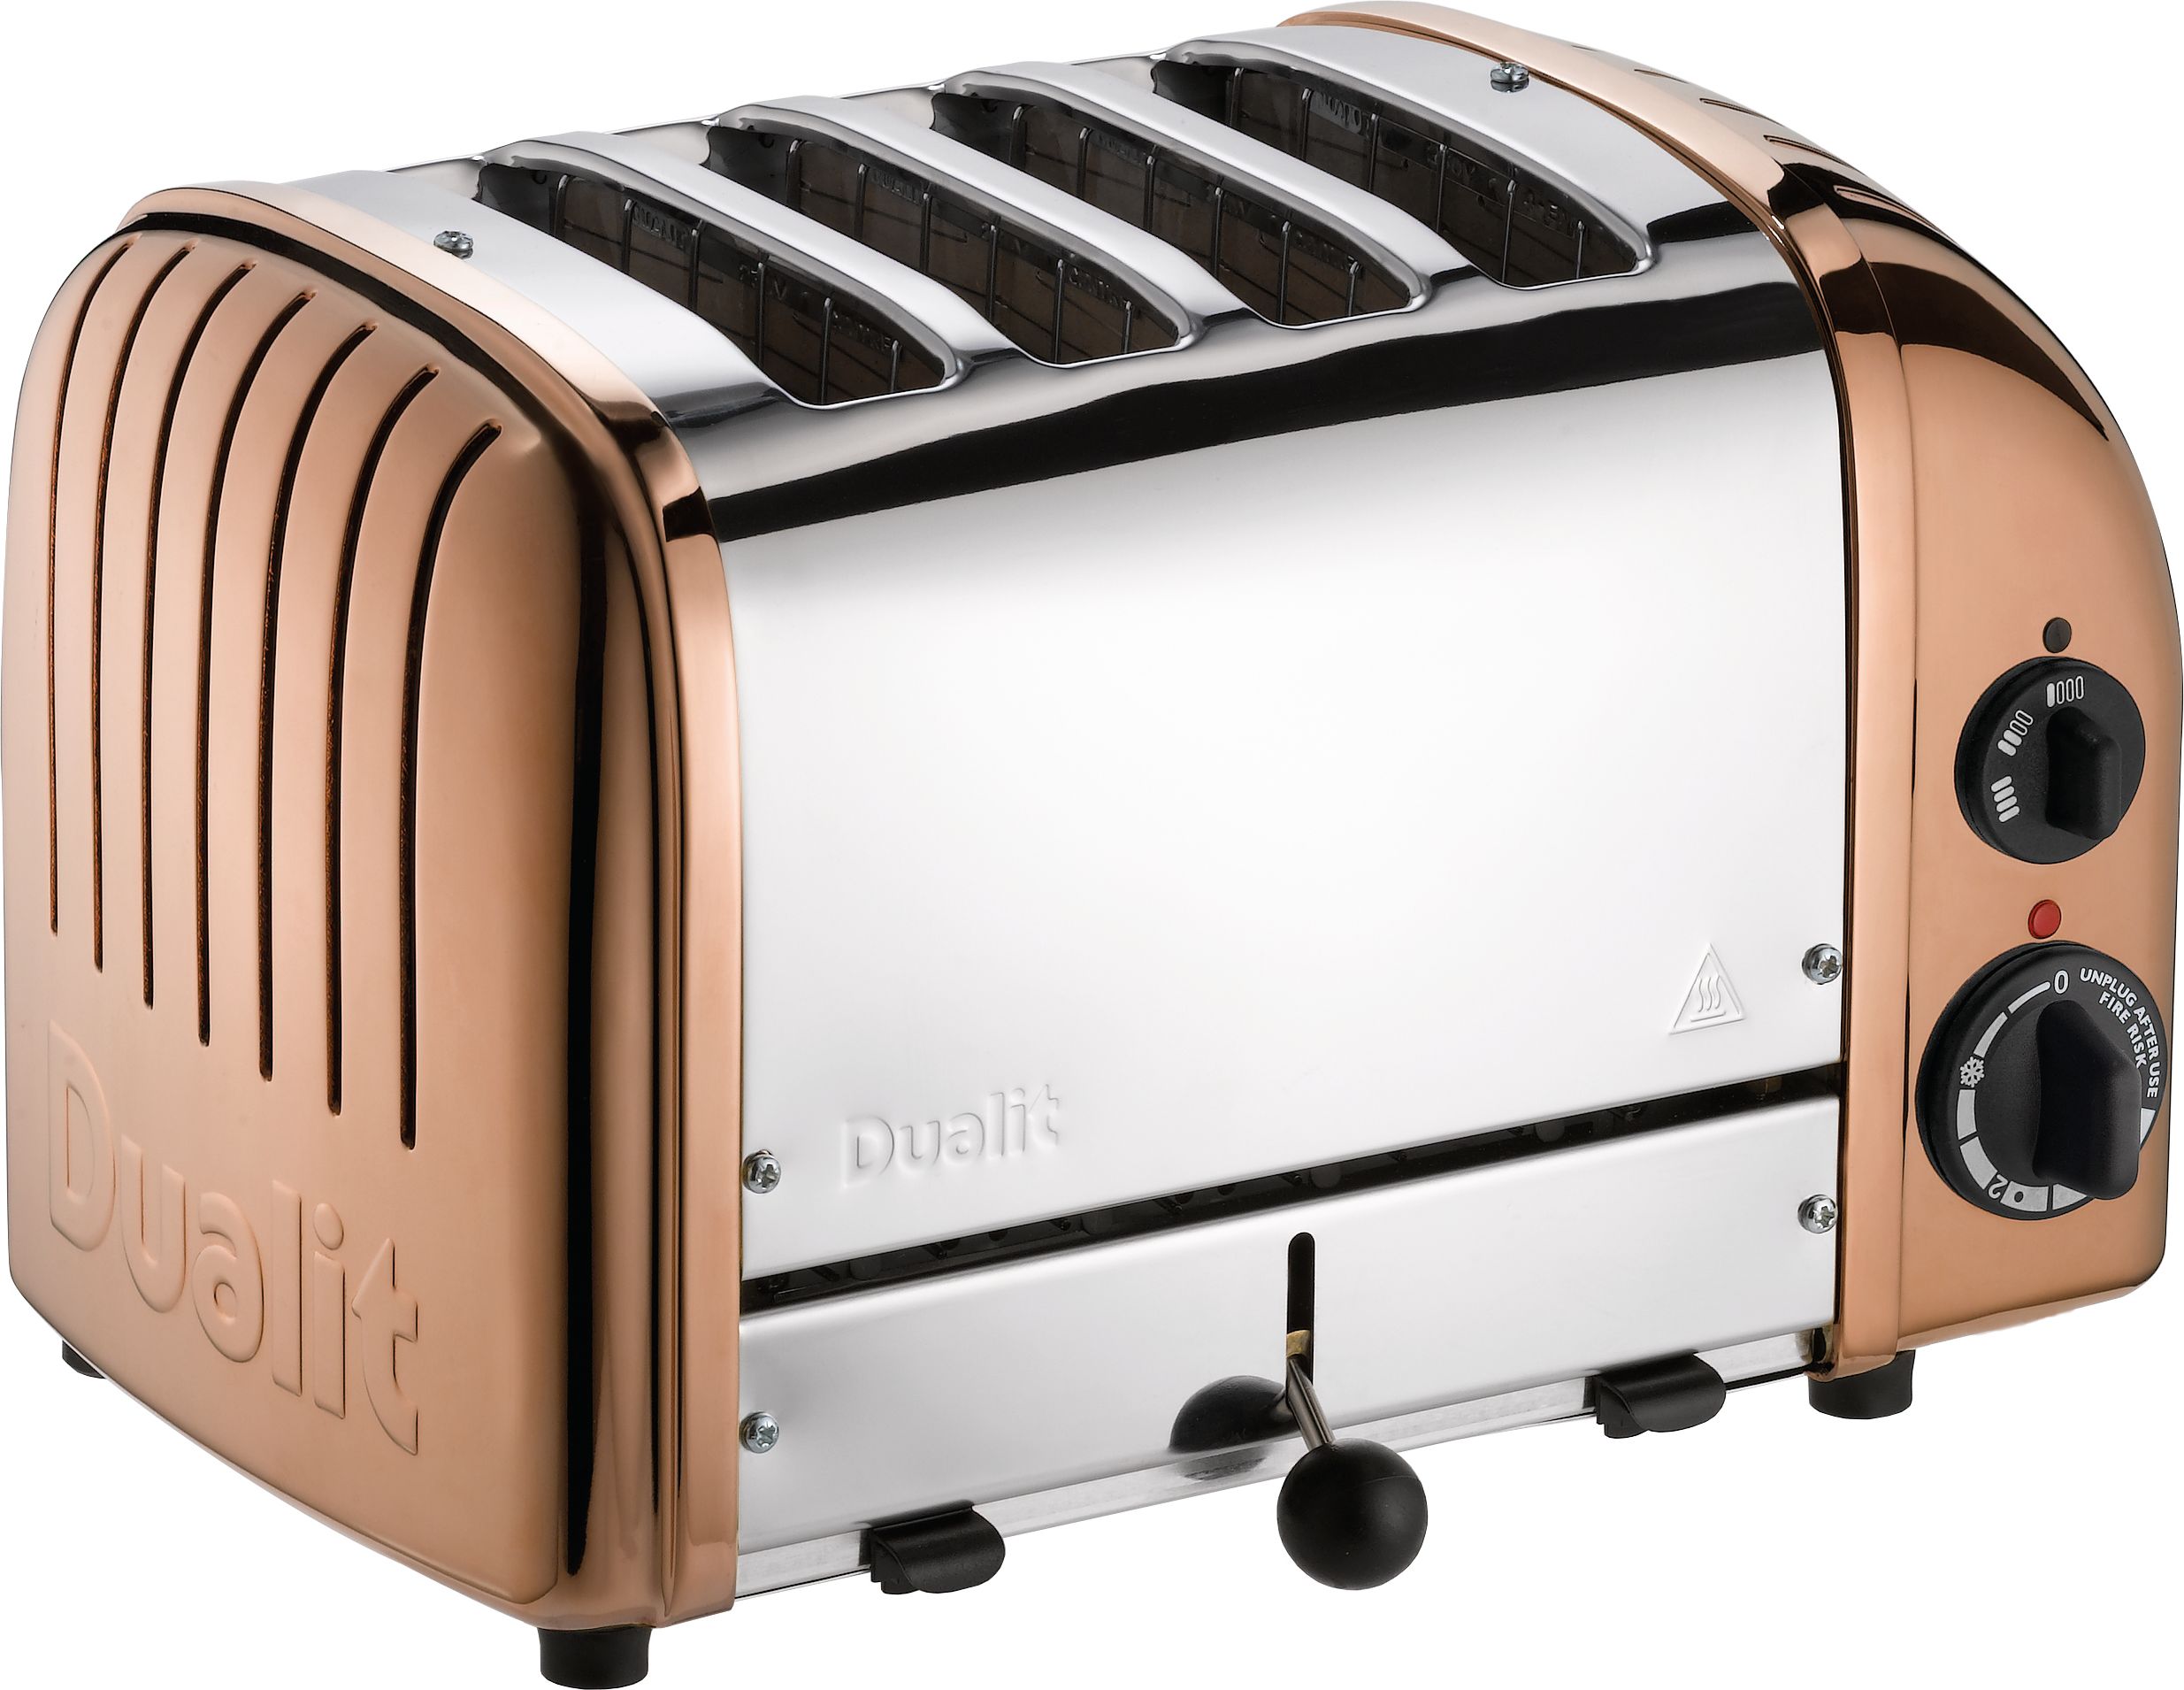 Dualit Classic 47450 4 Slice Toaster - Copper, Brass